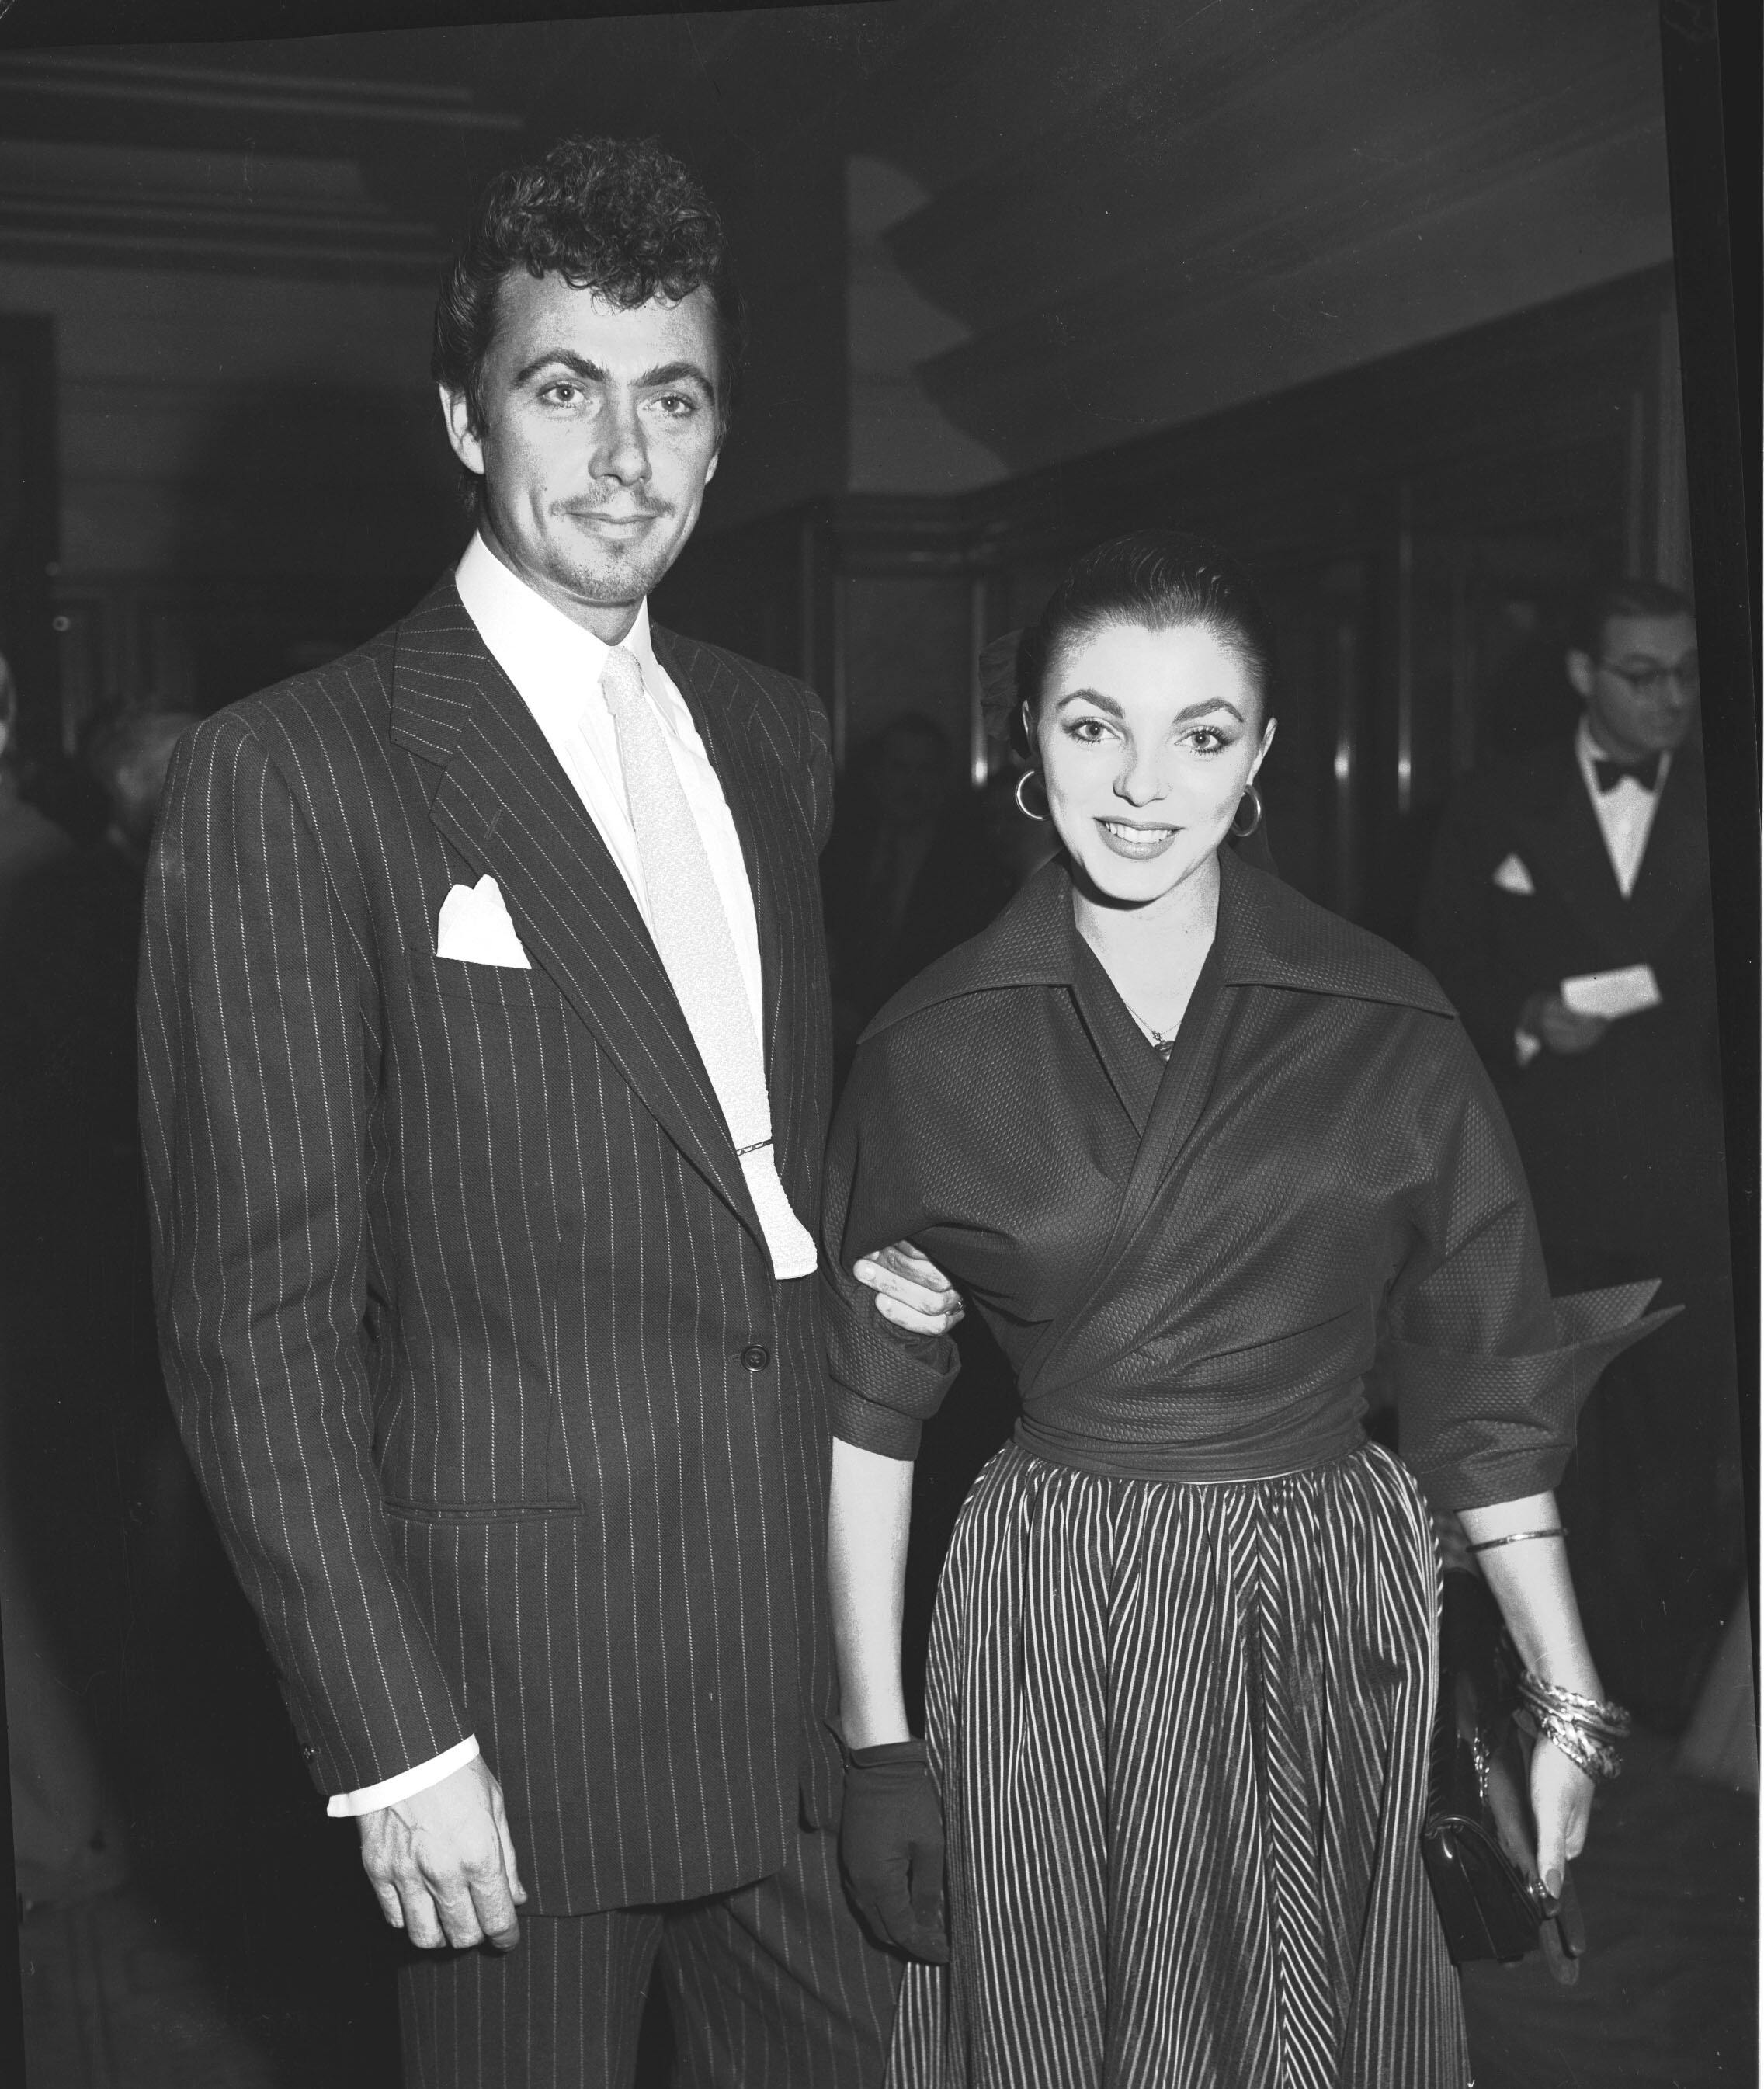 Actress Joan Collins and actor Maxwell Reed leave the register office after they were married, the day after her 19th birthday, at London's Caxton Hall Register Office on May 24, 1952. The couple went on to honeymoon in Spain. (AP Photo)